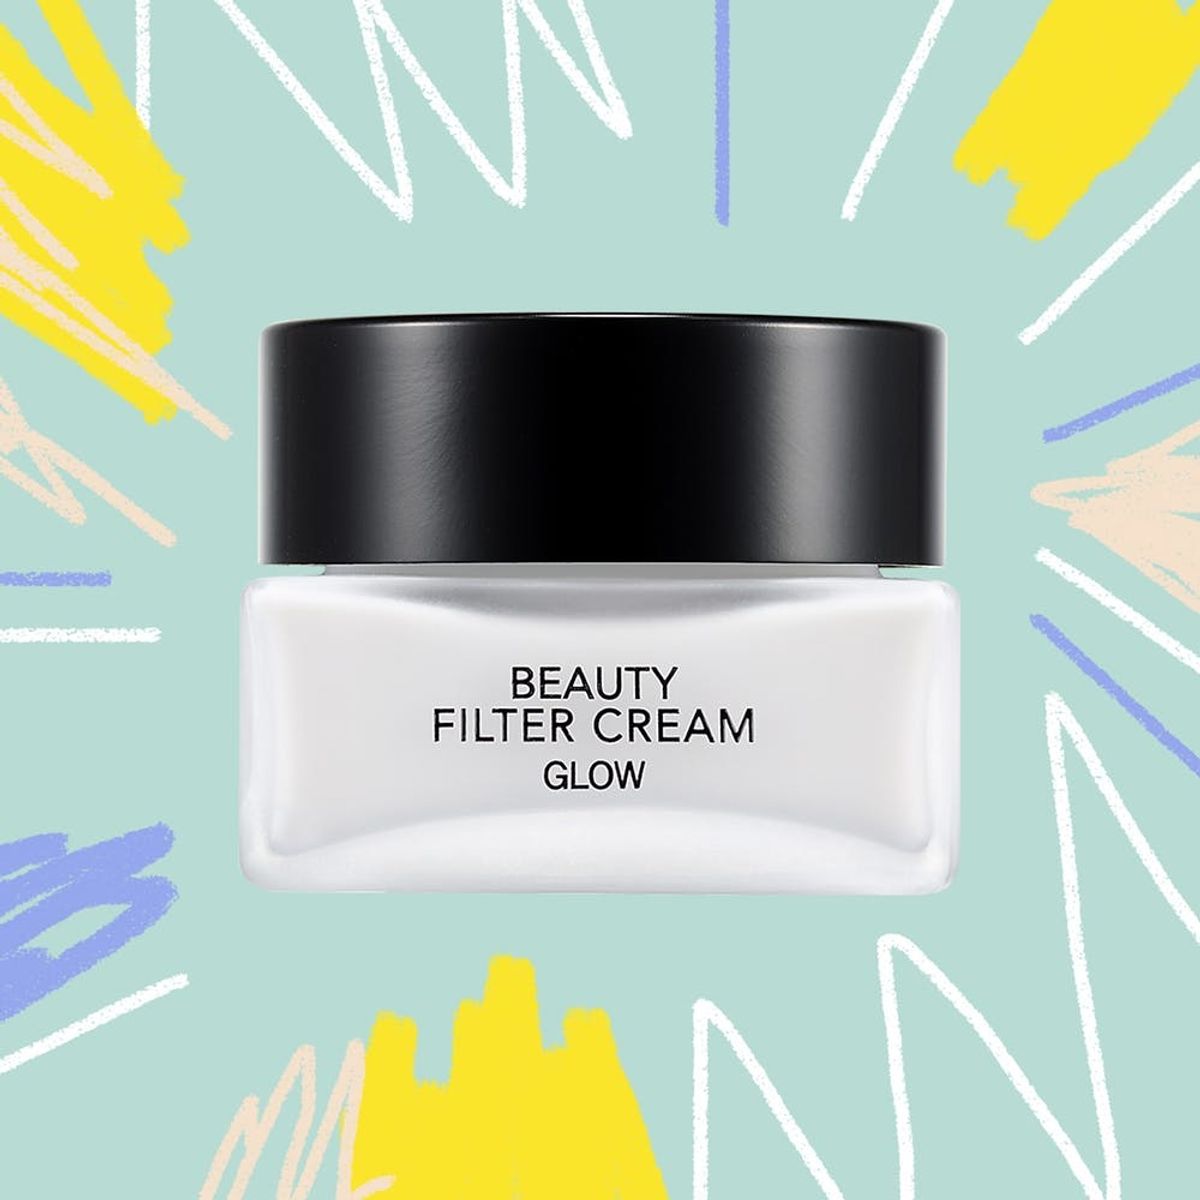 This Whipped Face Cream Is Like an IRL Beauty Instagram Filter